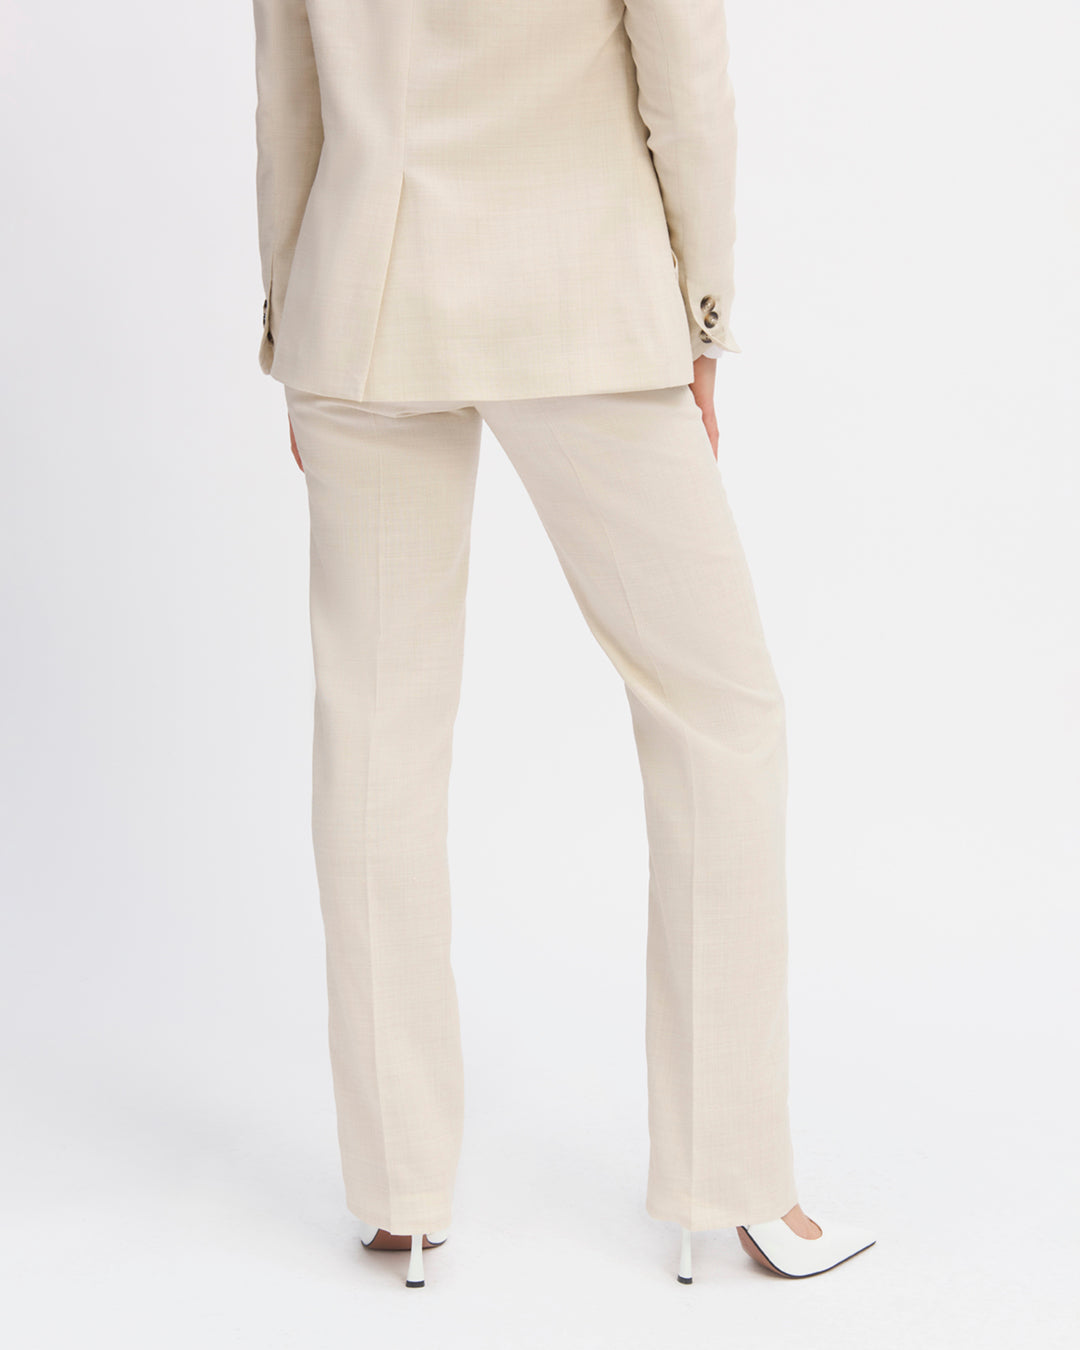 "Straight-cut-high-waist-lined-front-zip-close-with-hook-17H10-suit-for-women-paris-"